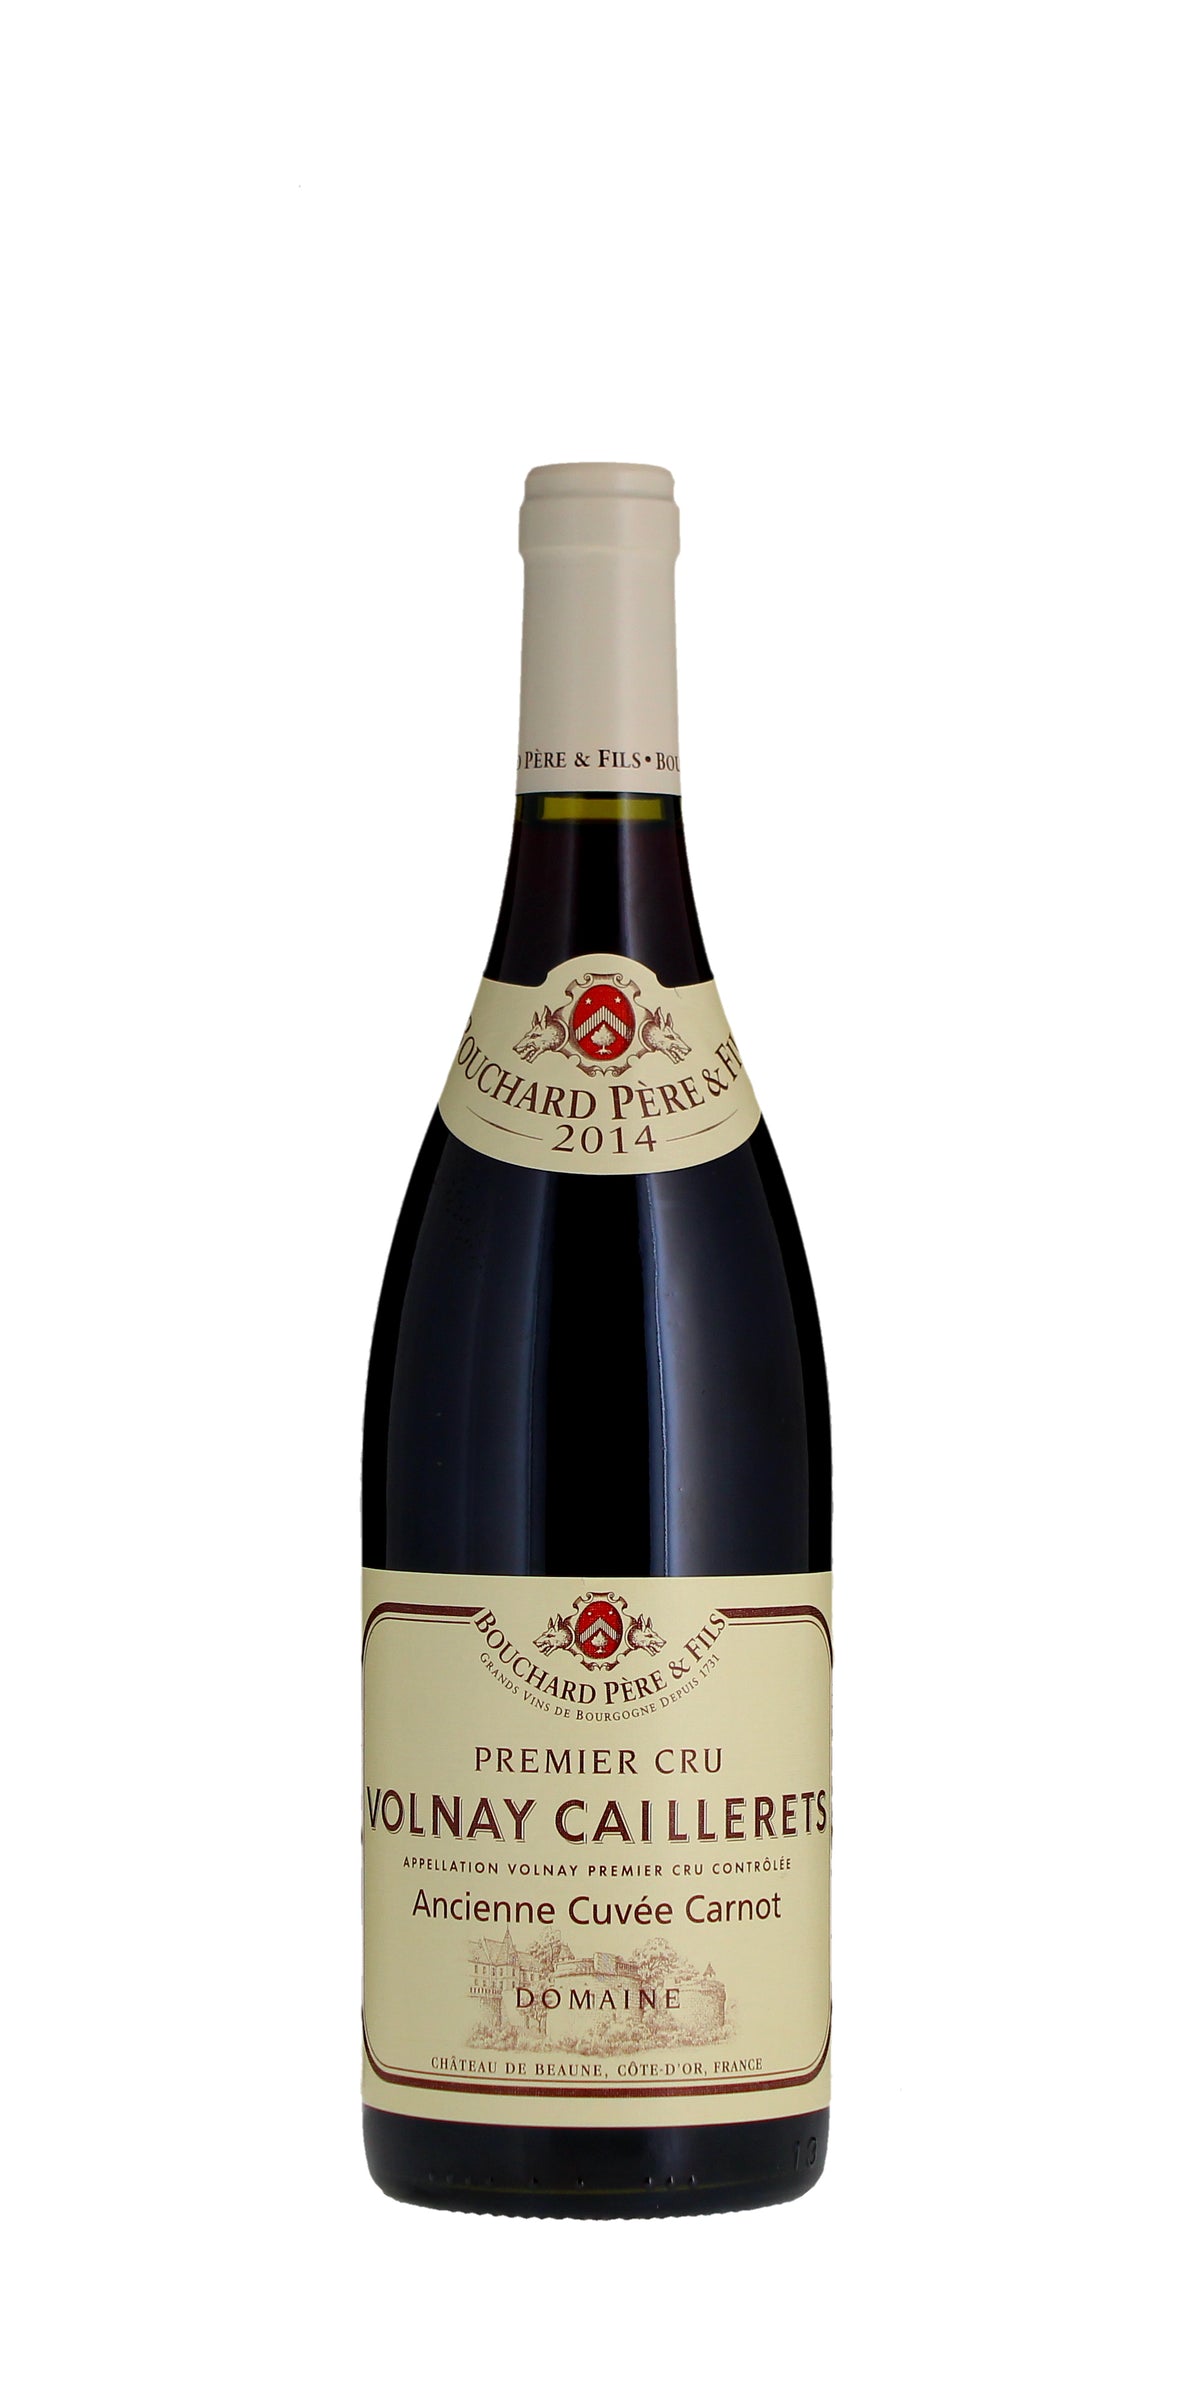 Bouchard Pere & Fils Caillerets Ancienne Cuvee Carnot, Volnay Premier Cru 2014